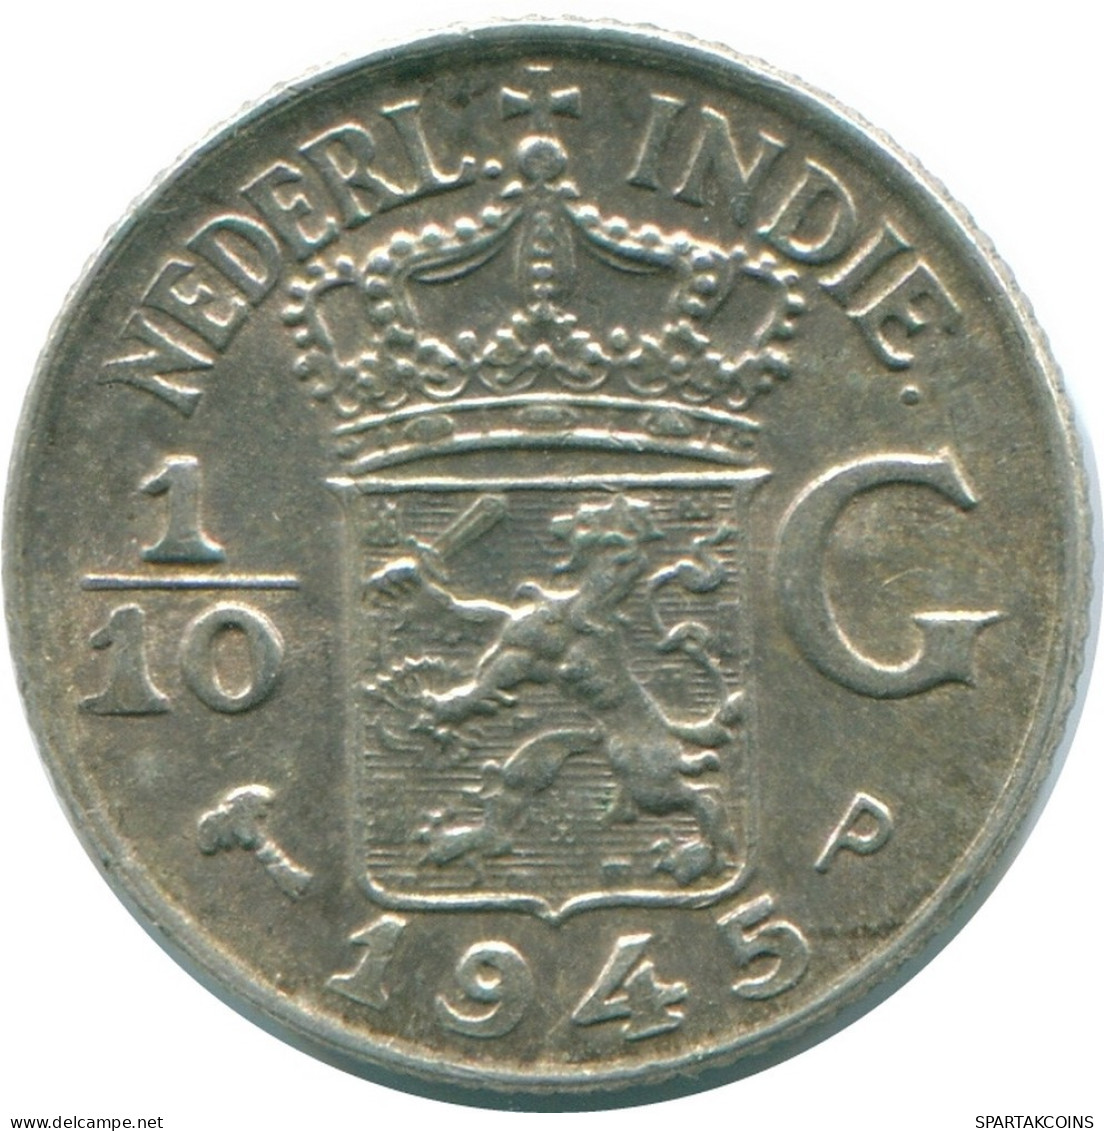 1/10 GULDEN 1945 P NETHERLANDS EAST INDIES SILVER Colonial Coin #NL14093.3.U.A - Dutch East Indies